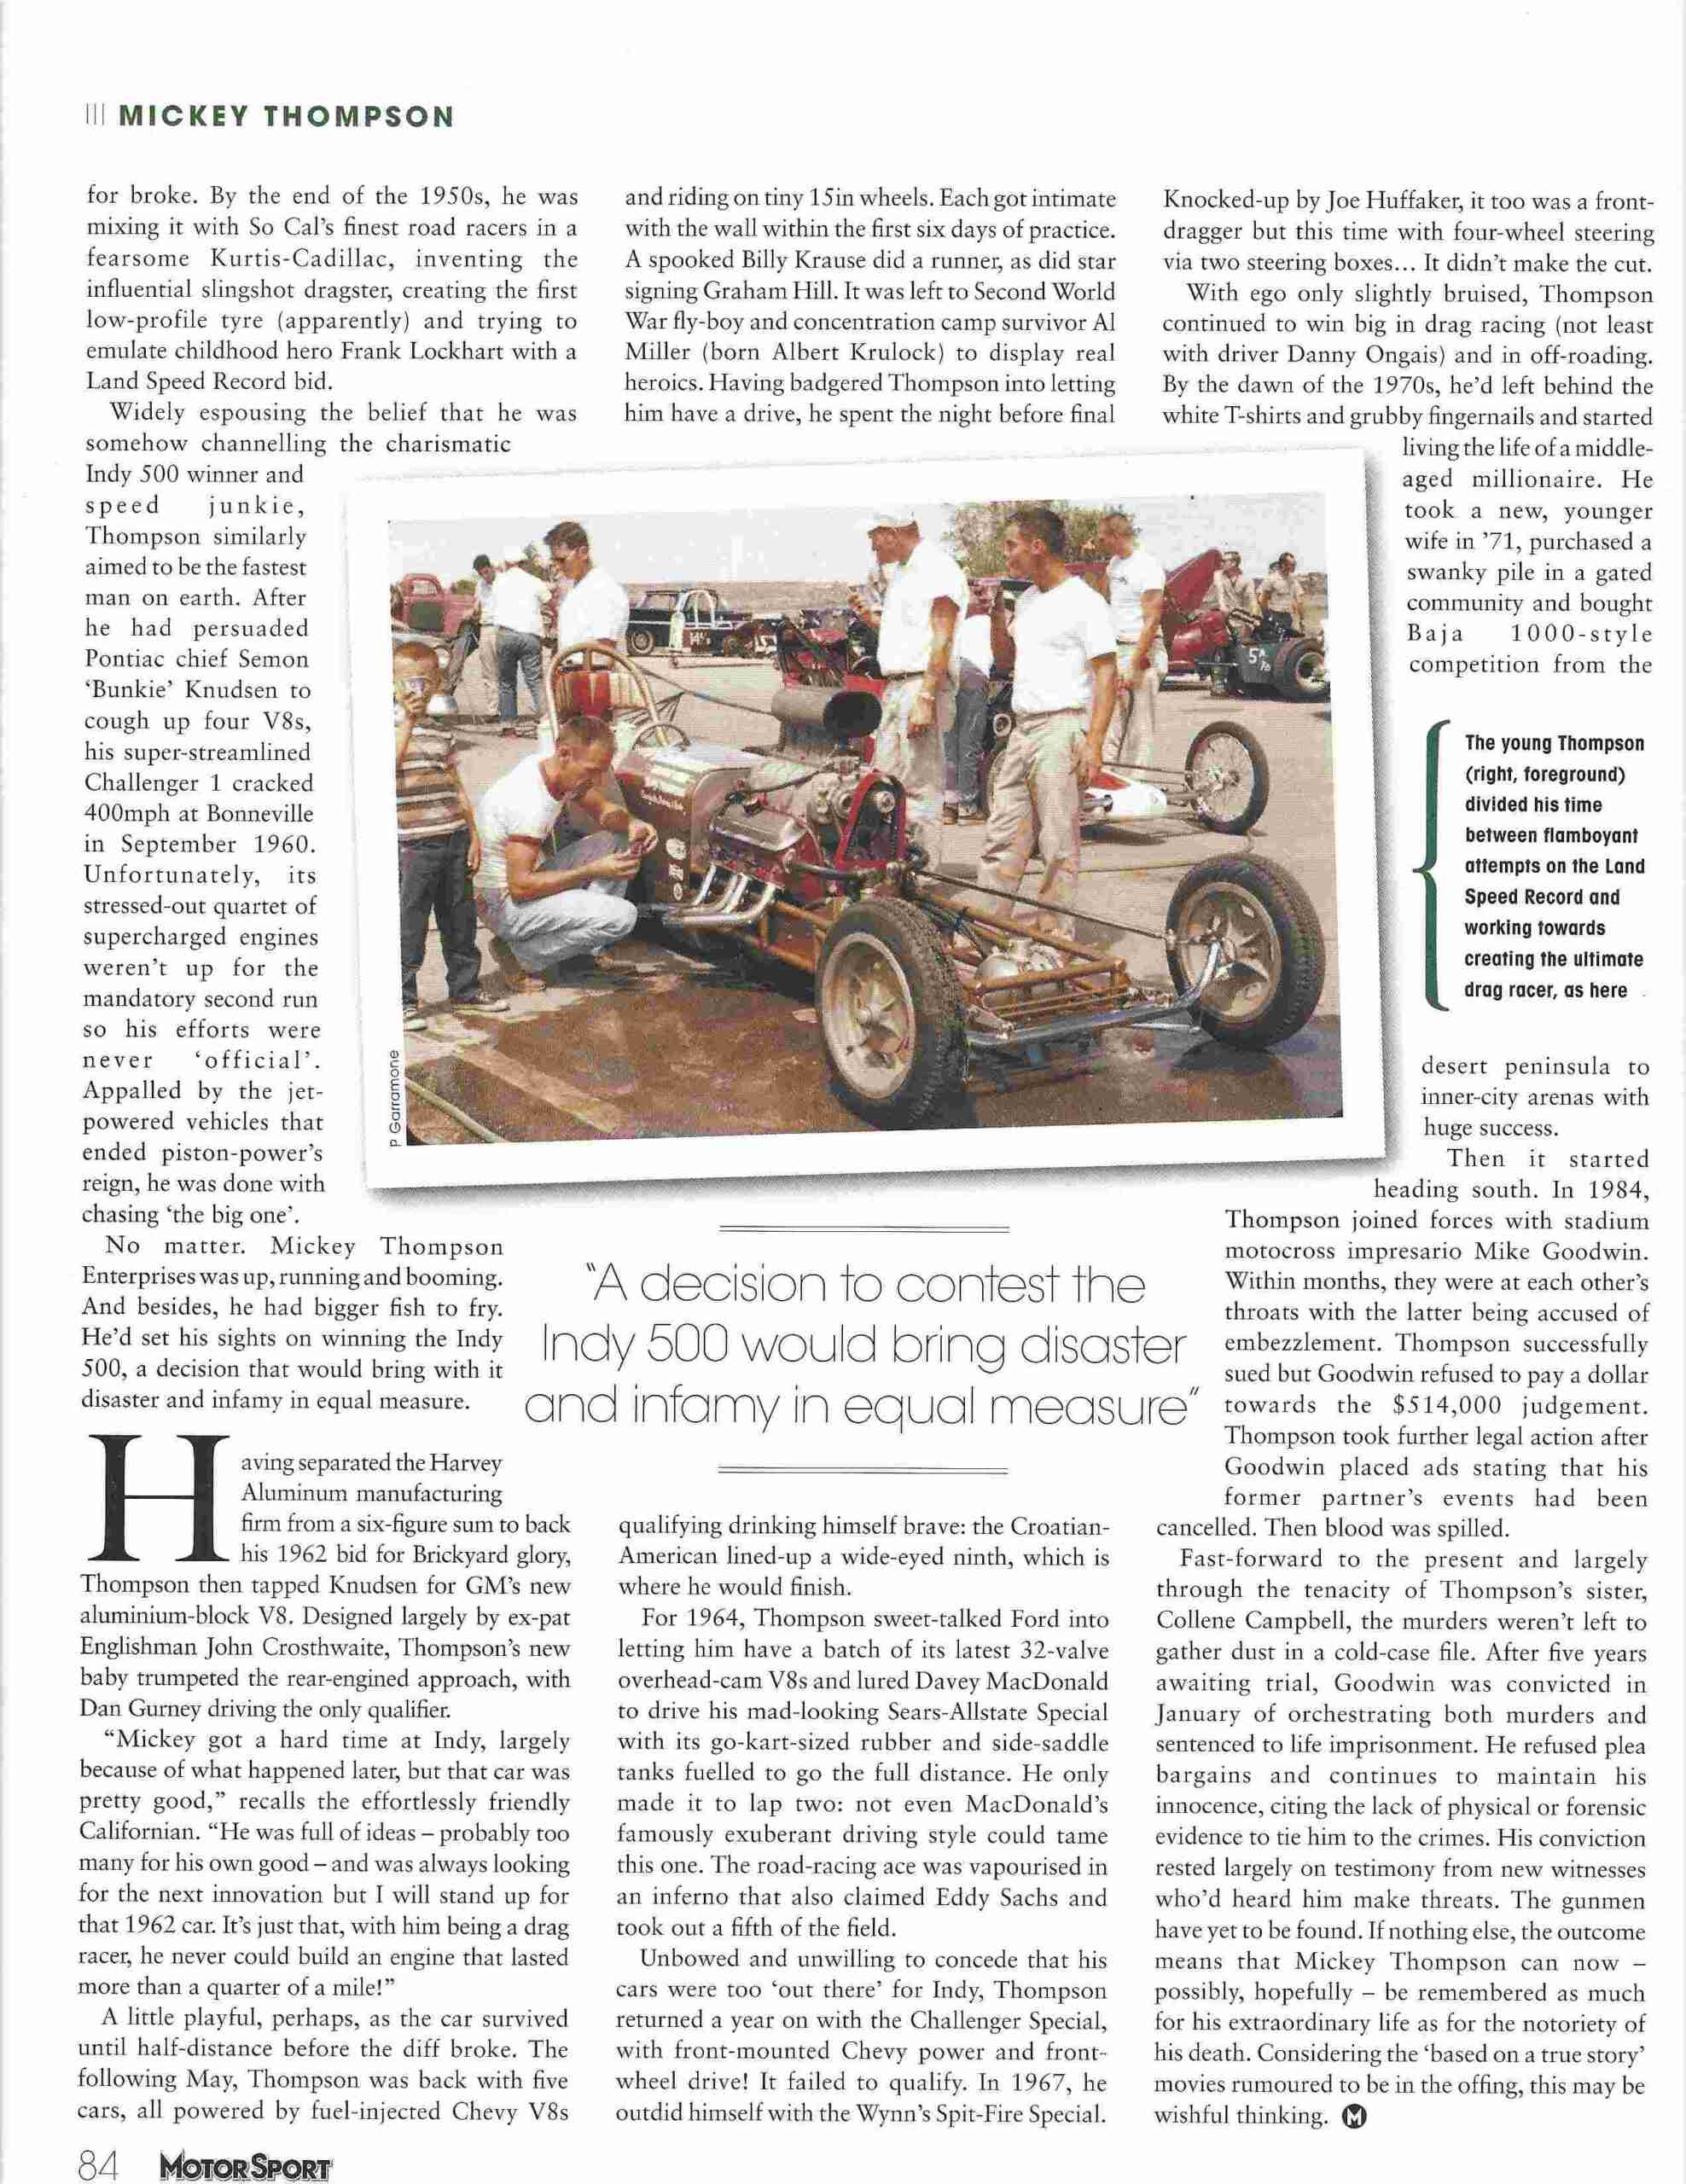 An article page section about Mickey Thompson